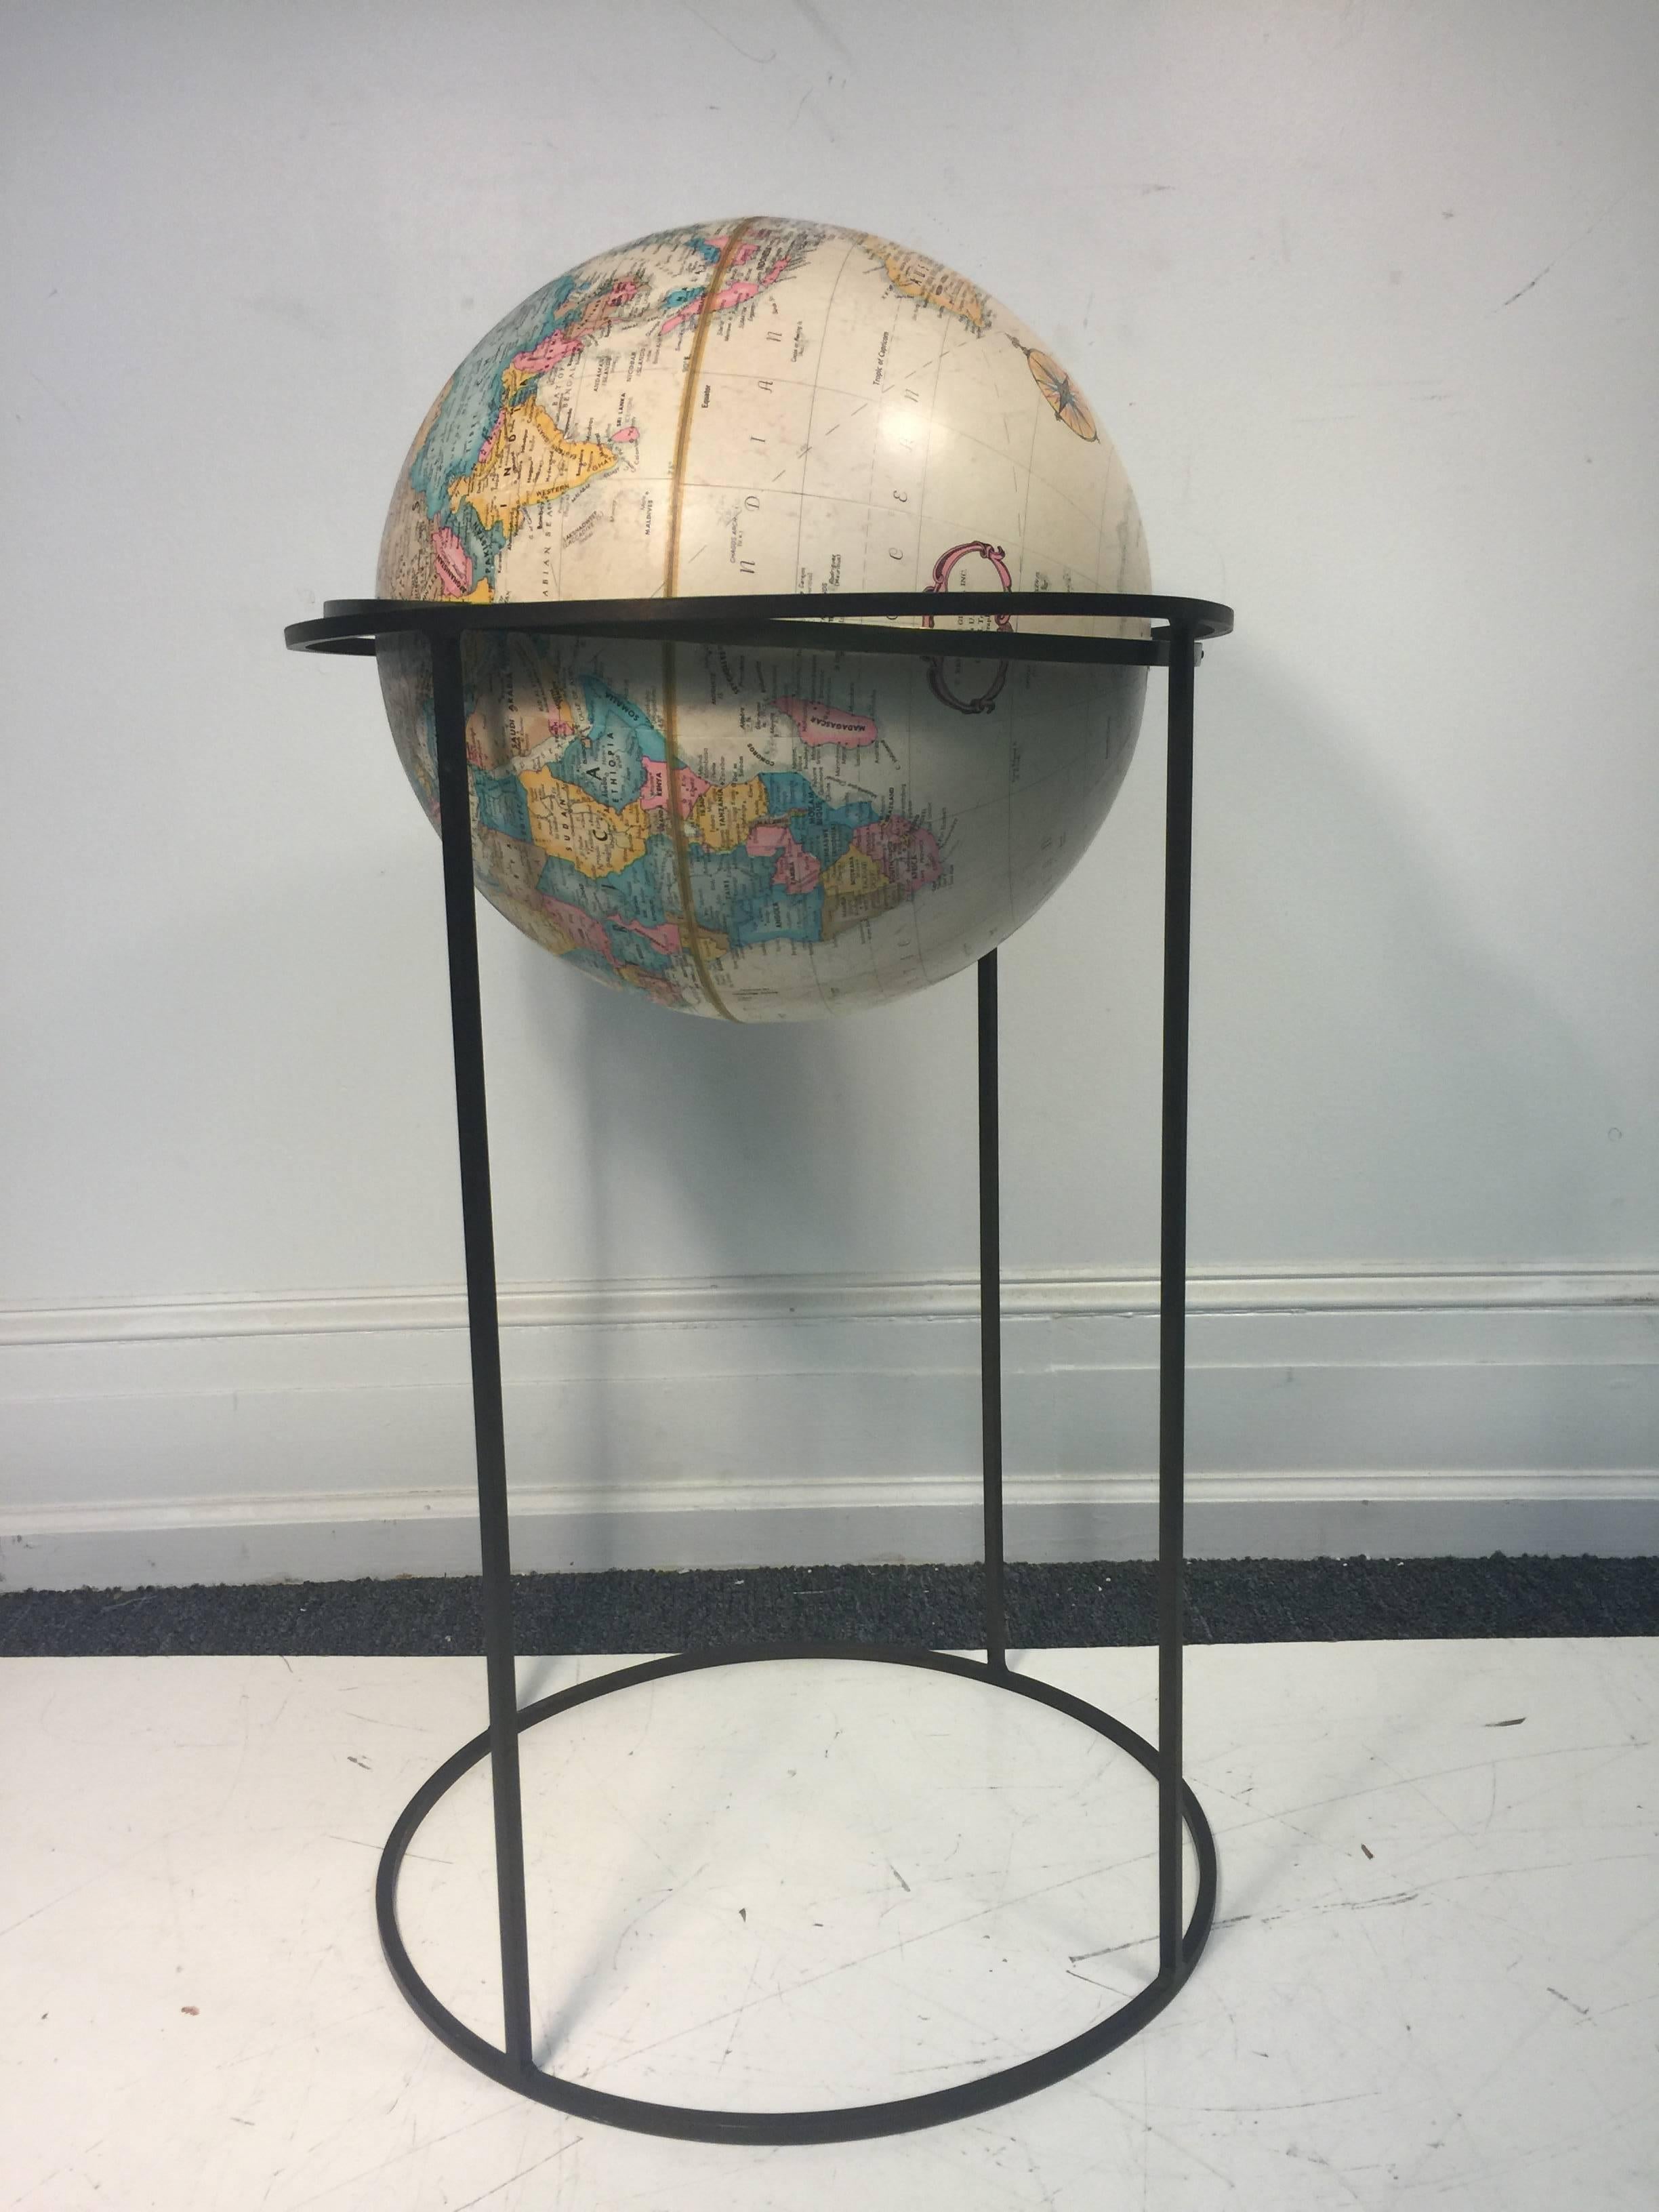 A modernistic world rotating globe with great design by Paul mccobb 